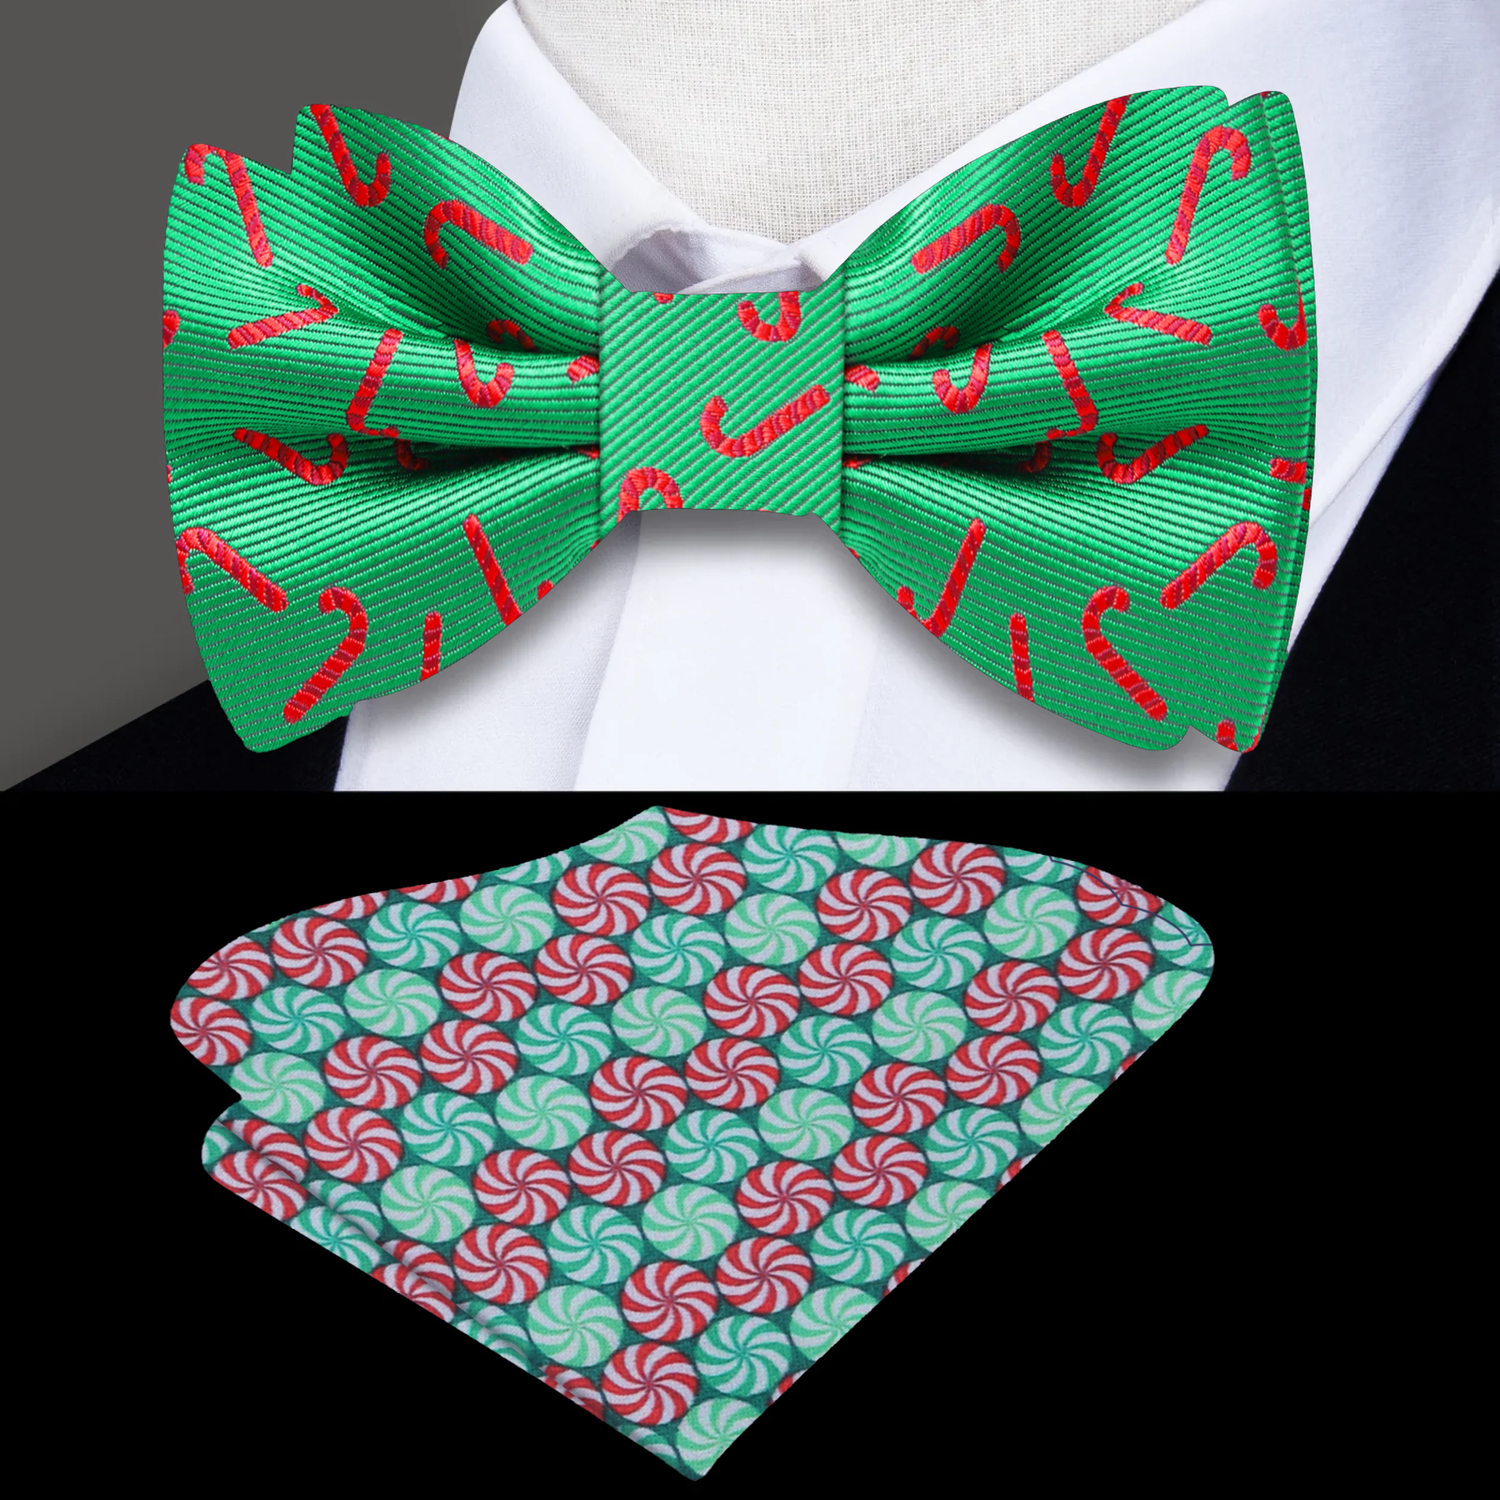 Green Silk with Red Candy Cane Bow Tie and Accenting pocket Square